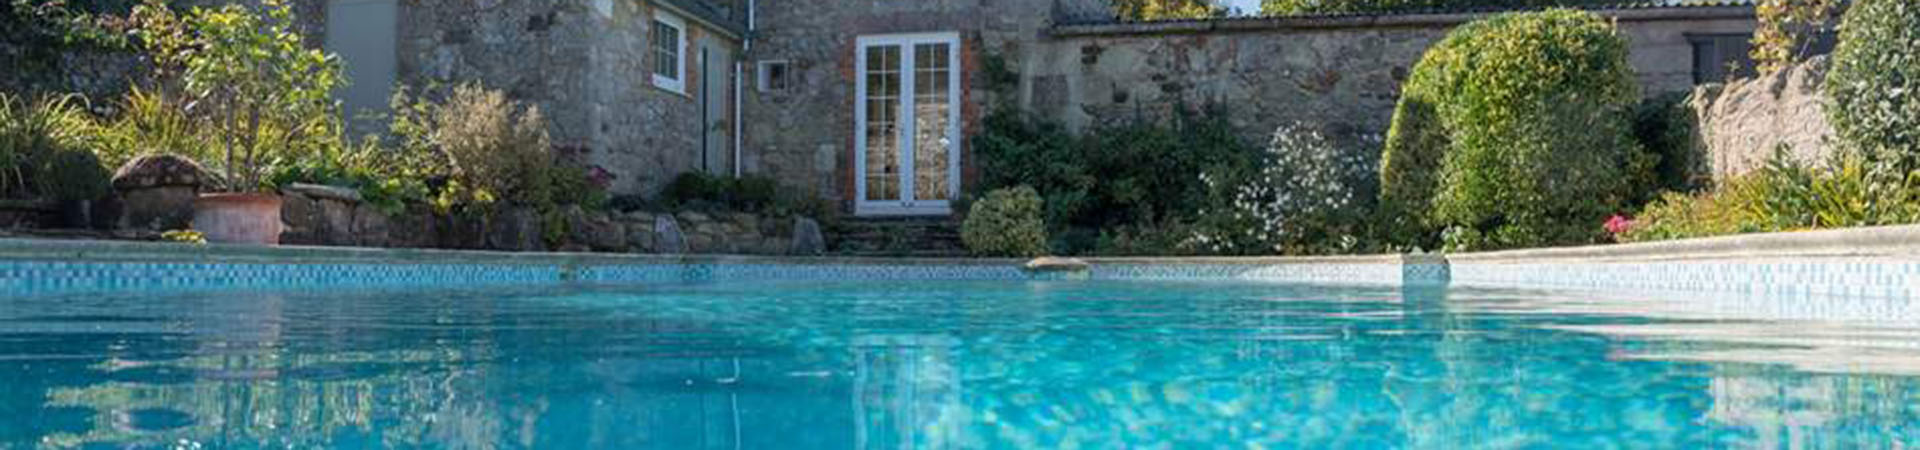 Holiday cottages with pools in Herefordshire